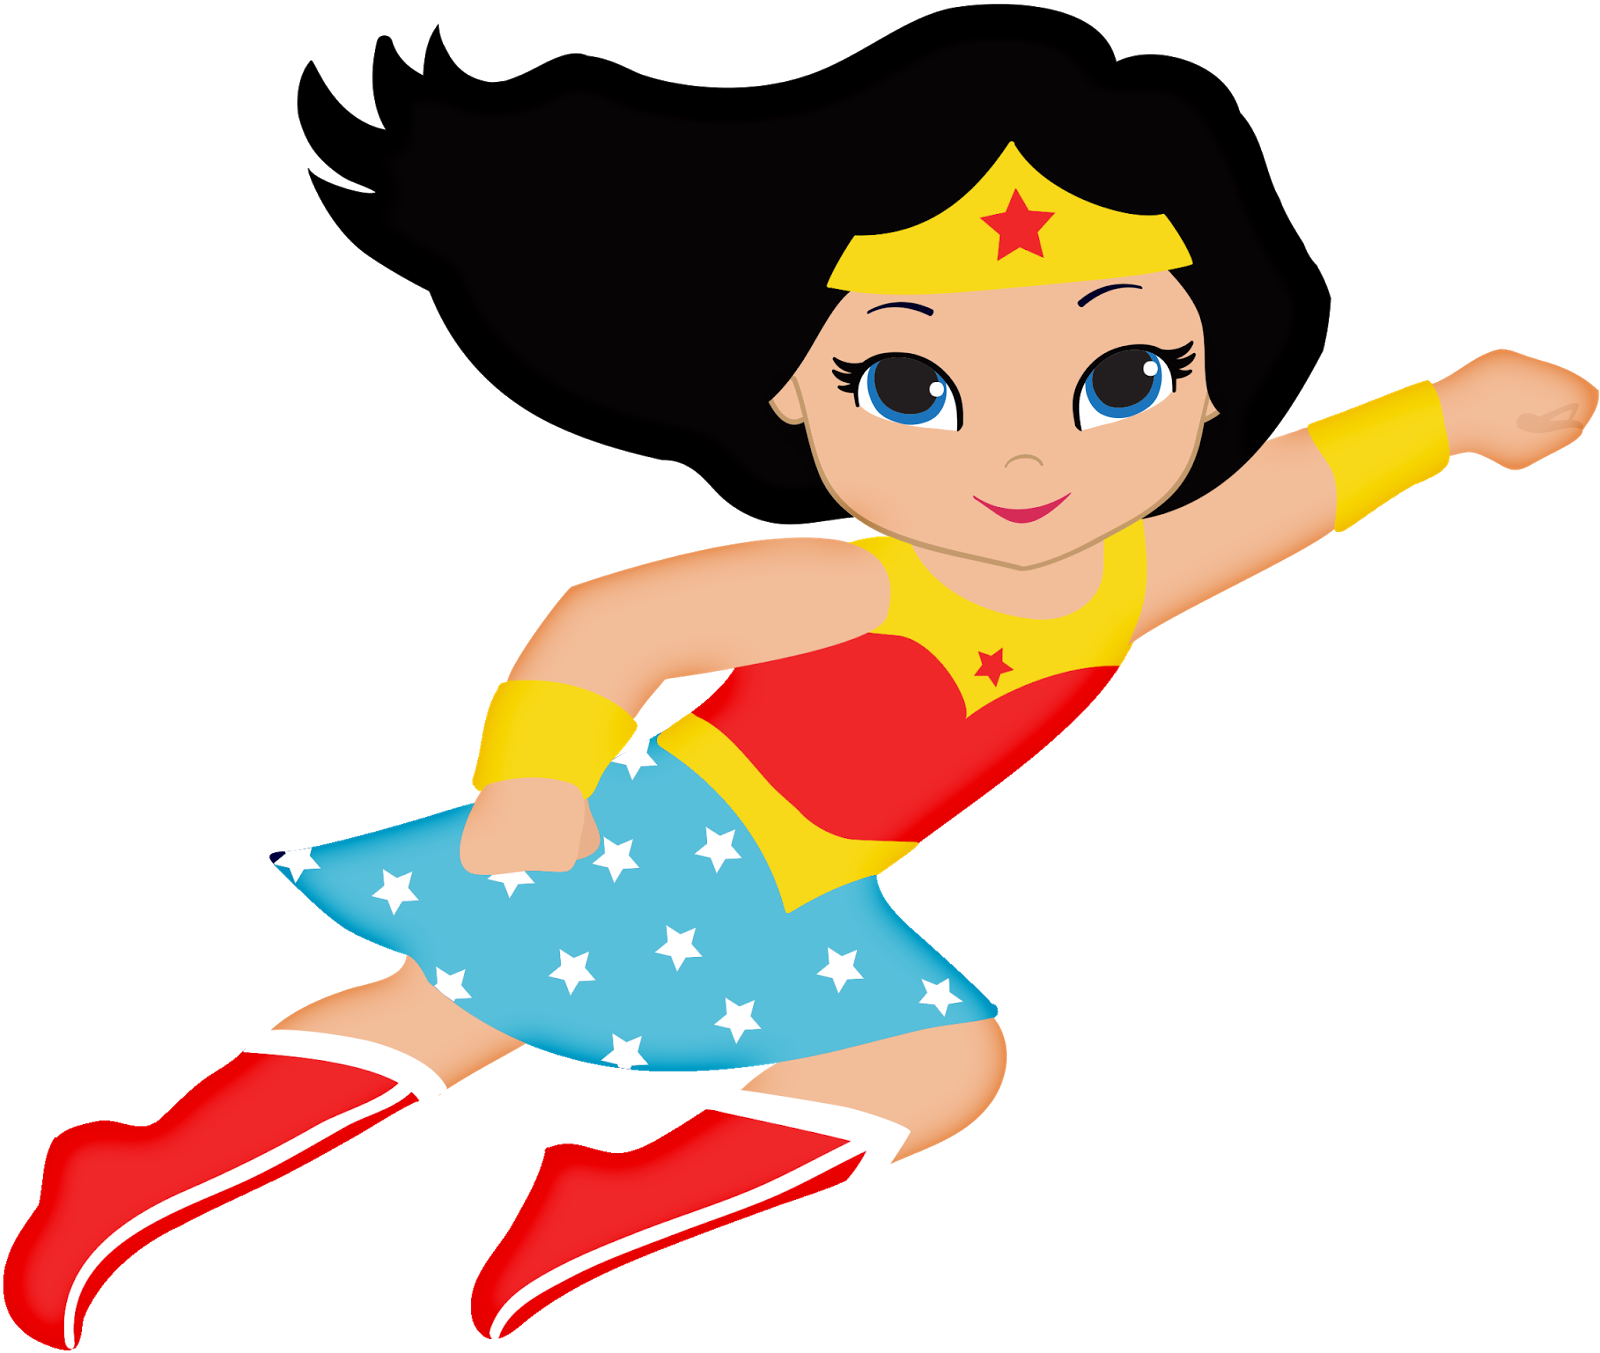 Fiesta clipart themed. Wonder woman baby oh